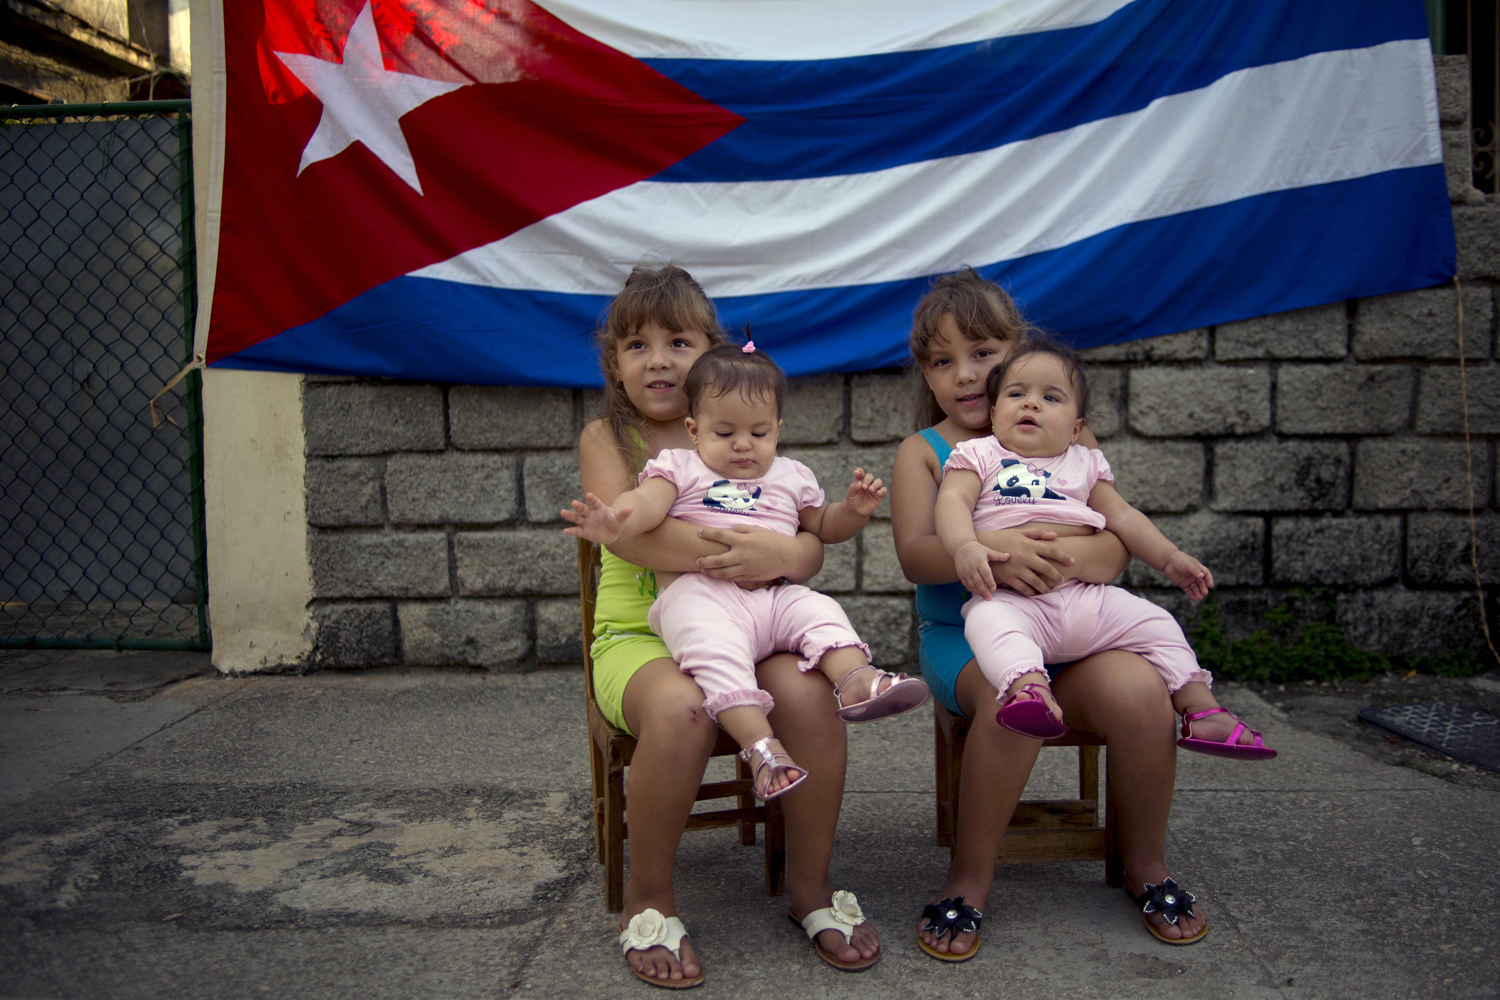 Sept. 29, 2013 Six-year-old twins Asley and Aslen Velazquez hold eight-month-old twins Tiffani and Stessany Valles as they pose for portraits in front a Cuban flag on their street in Havana, Cuba.